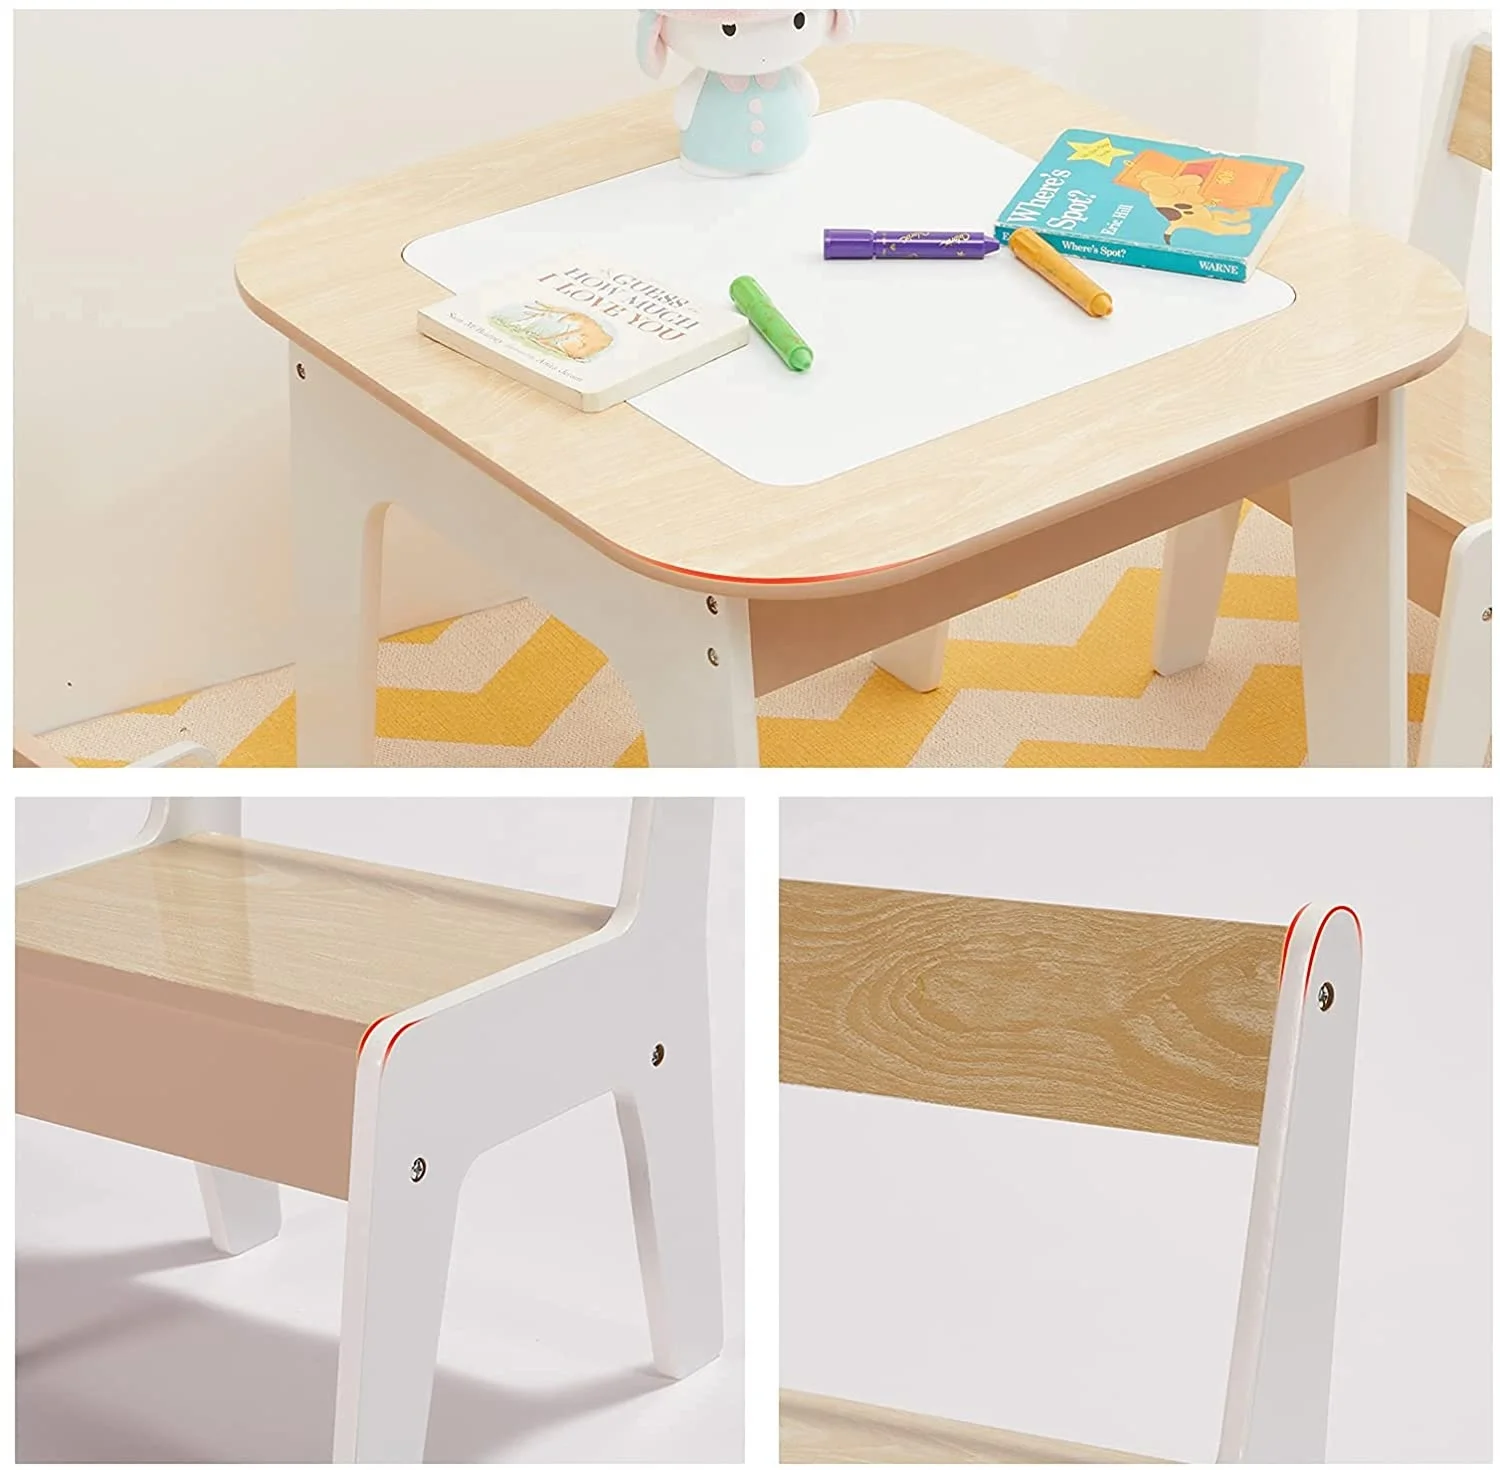 NOVA 3 In 1 Children Furniture Wooden Storage Table And Chairs Set For Drawing Reading Art Playroom Activity